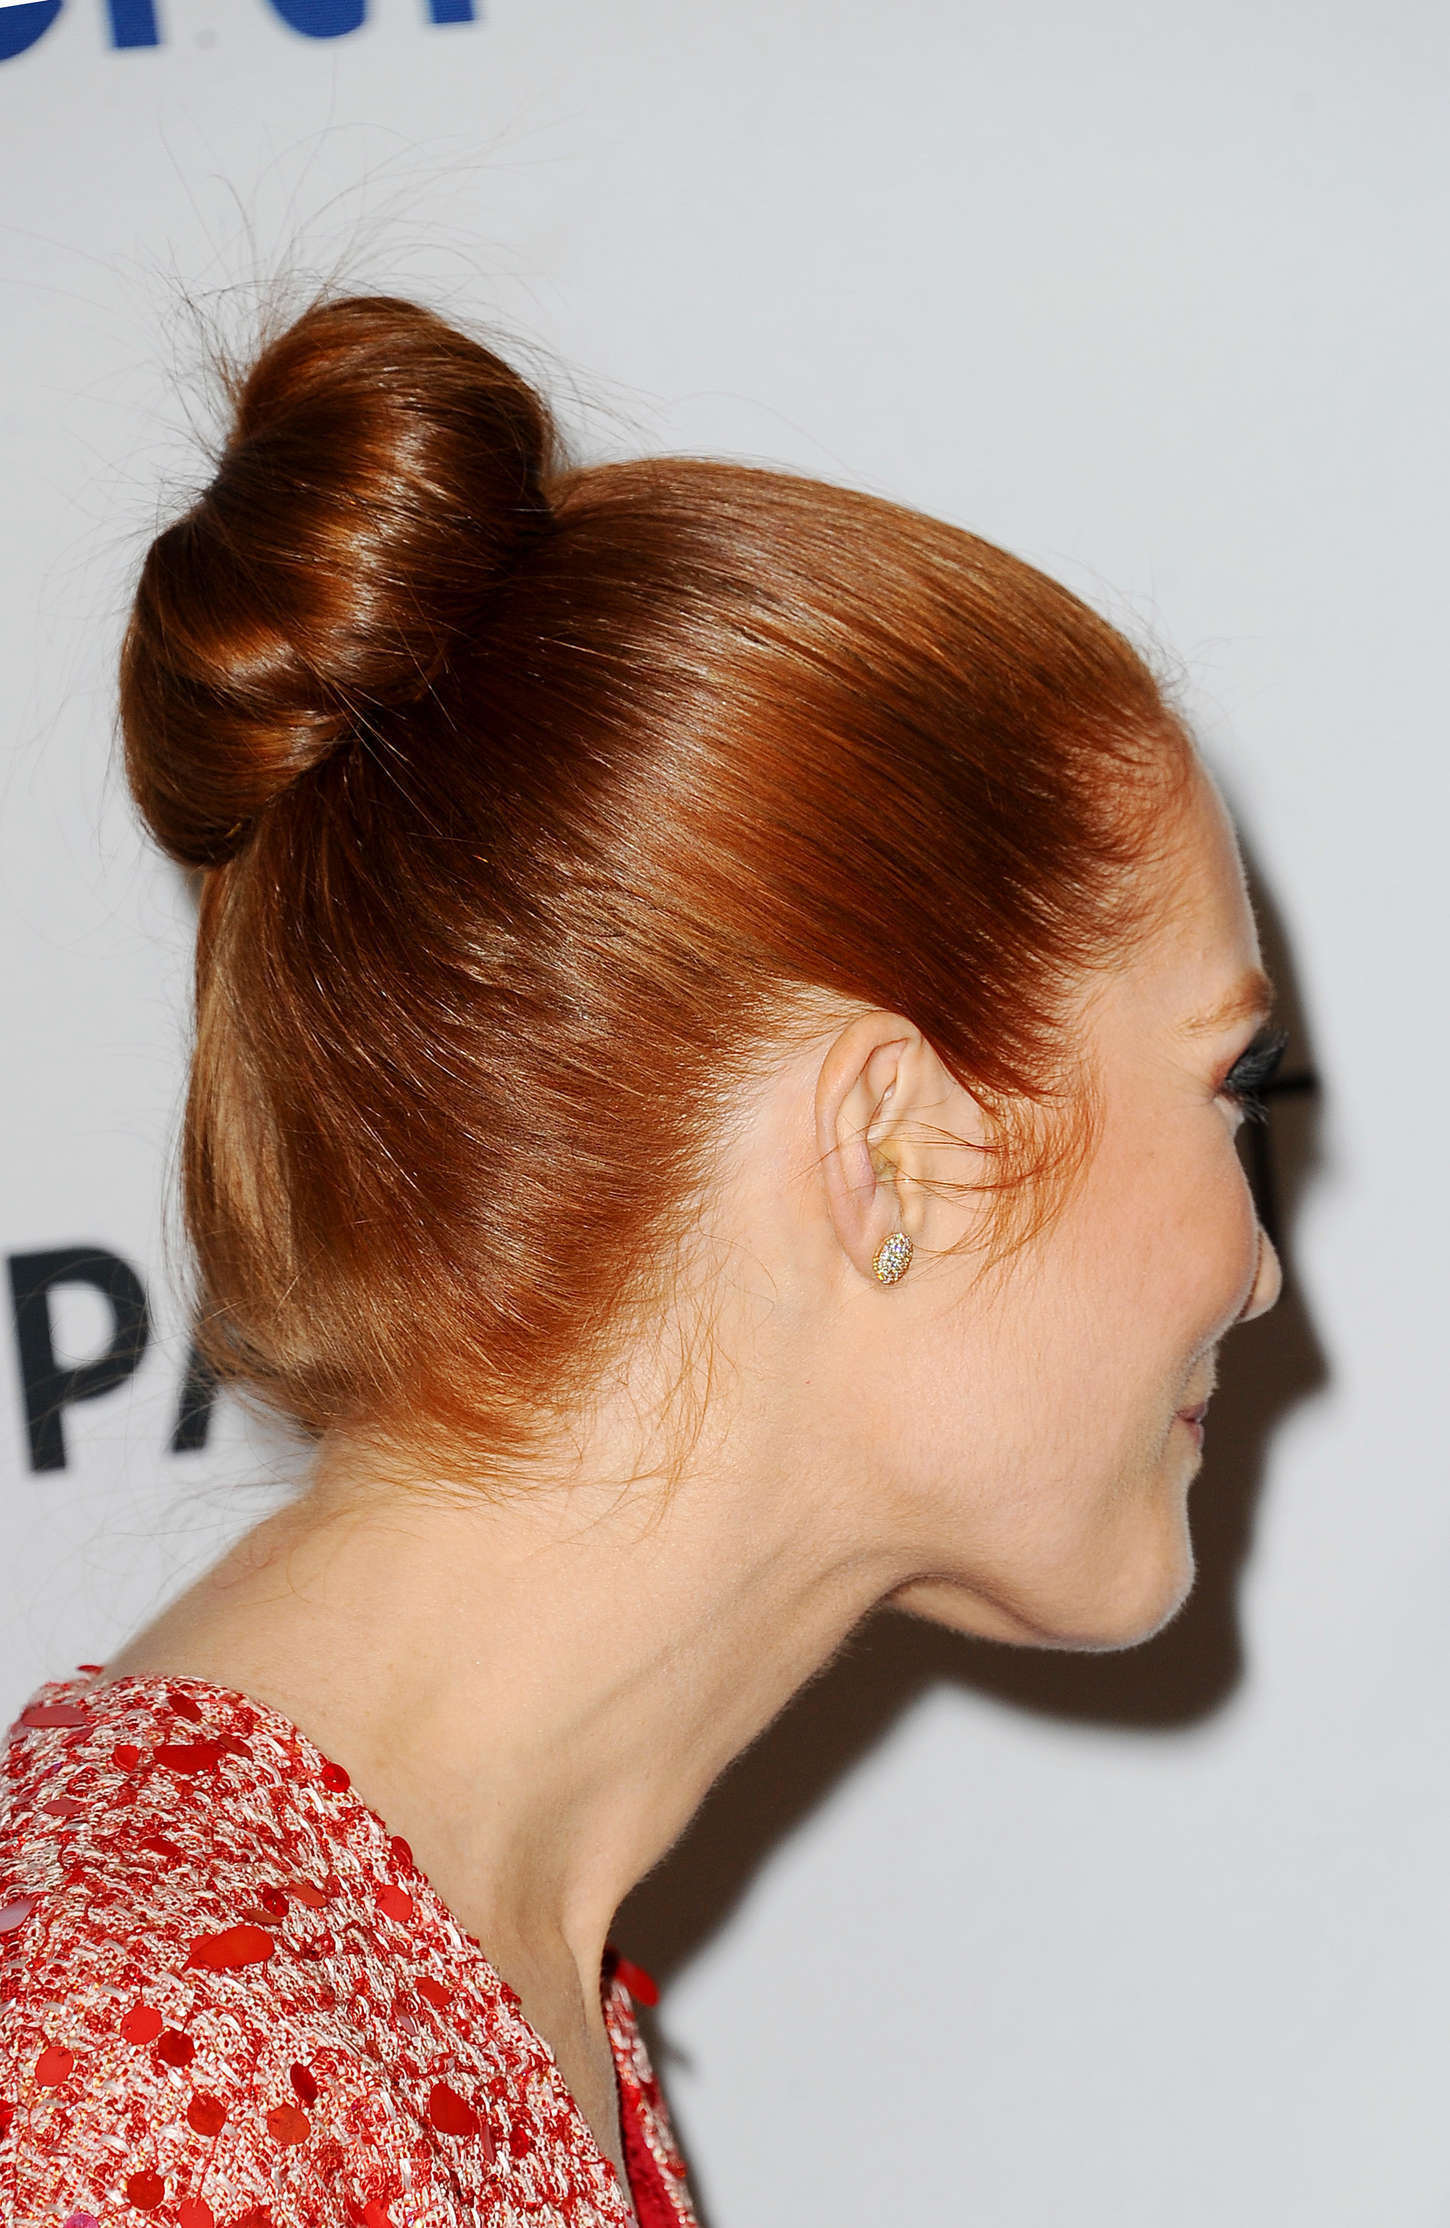 Darby Stanchfield Annual PaleyFest in Hollywood